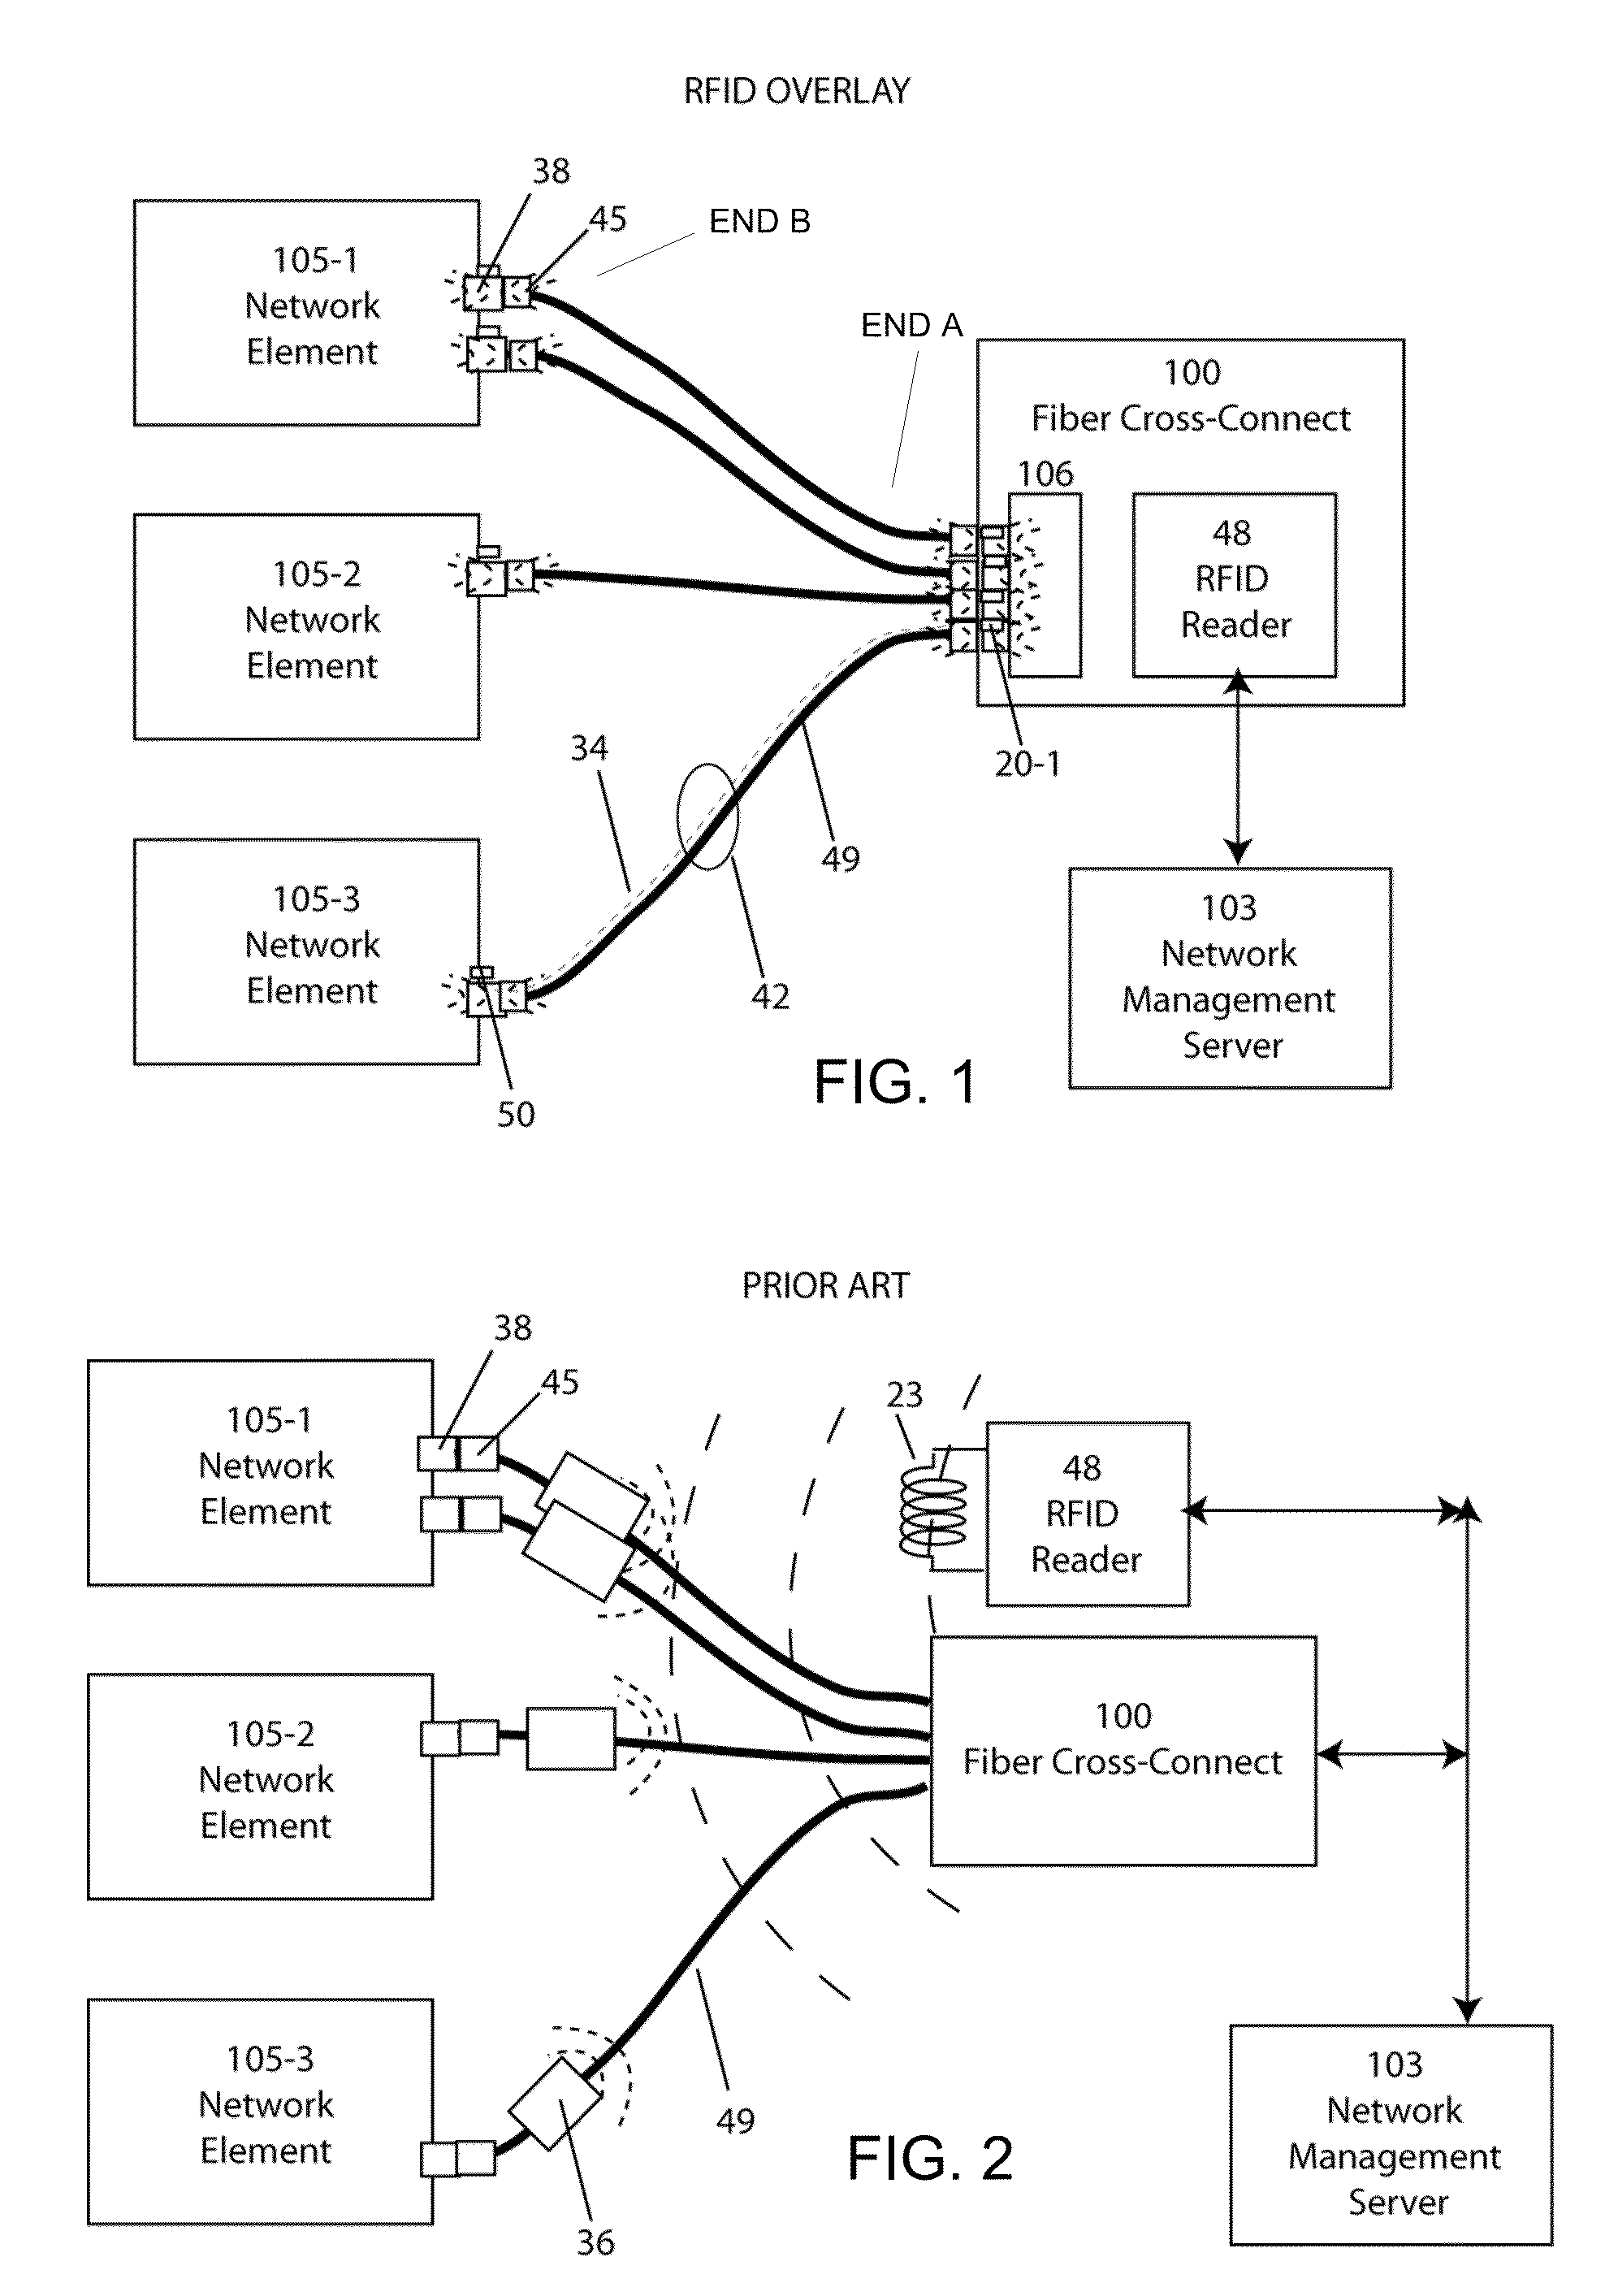 Radio frequency identification overlay network for fiber optic communication systems